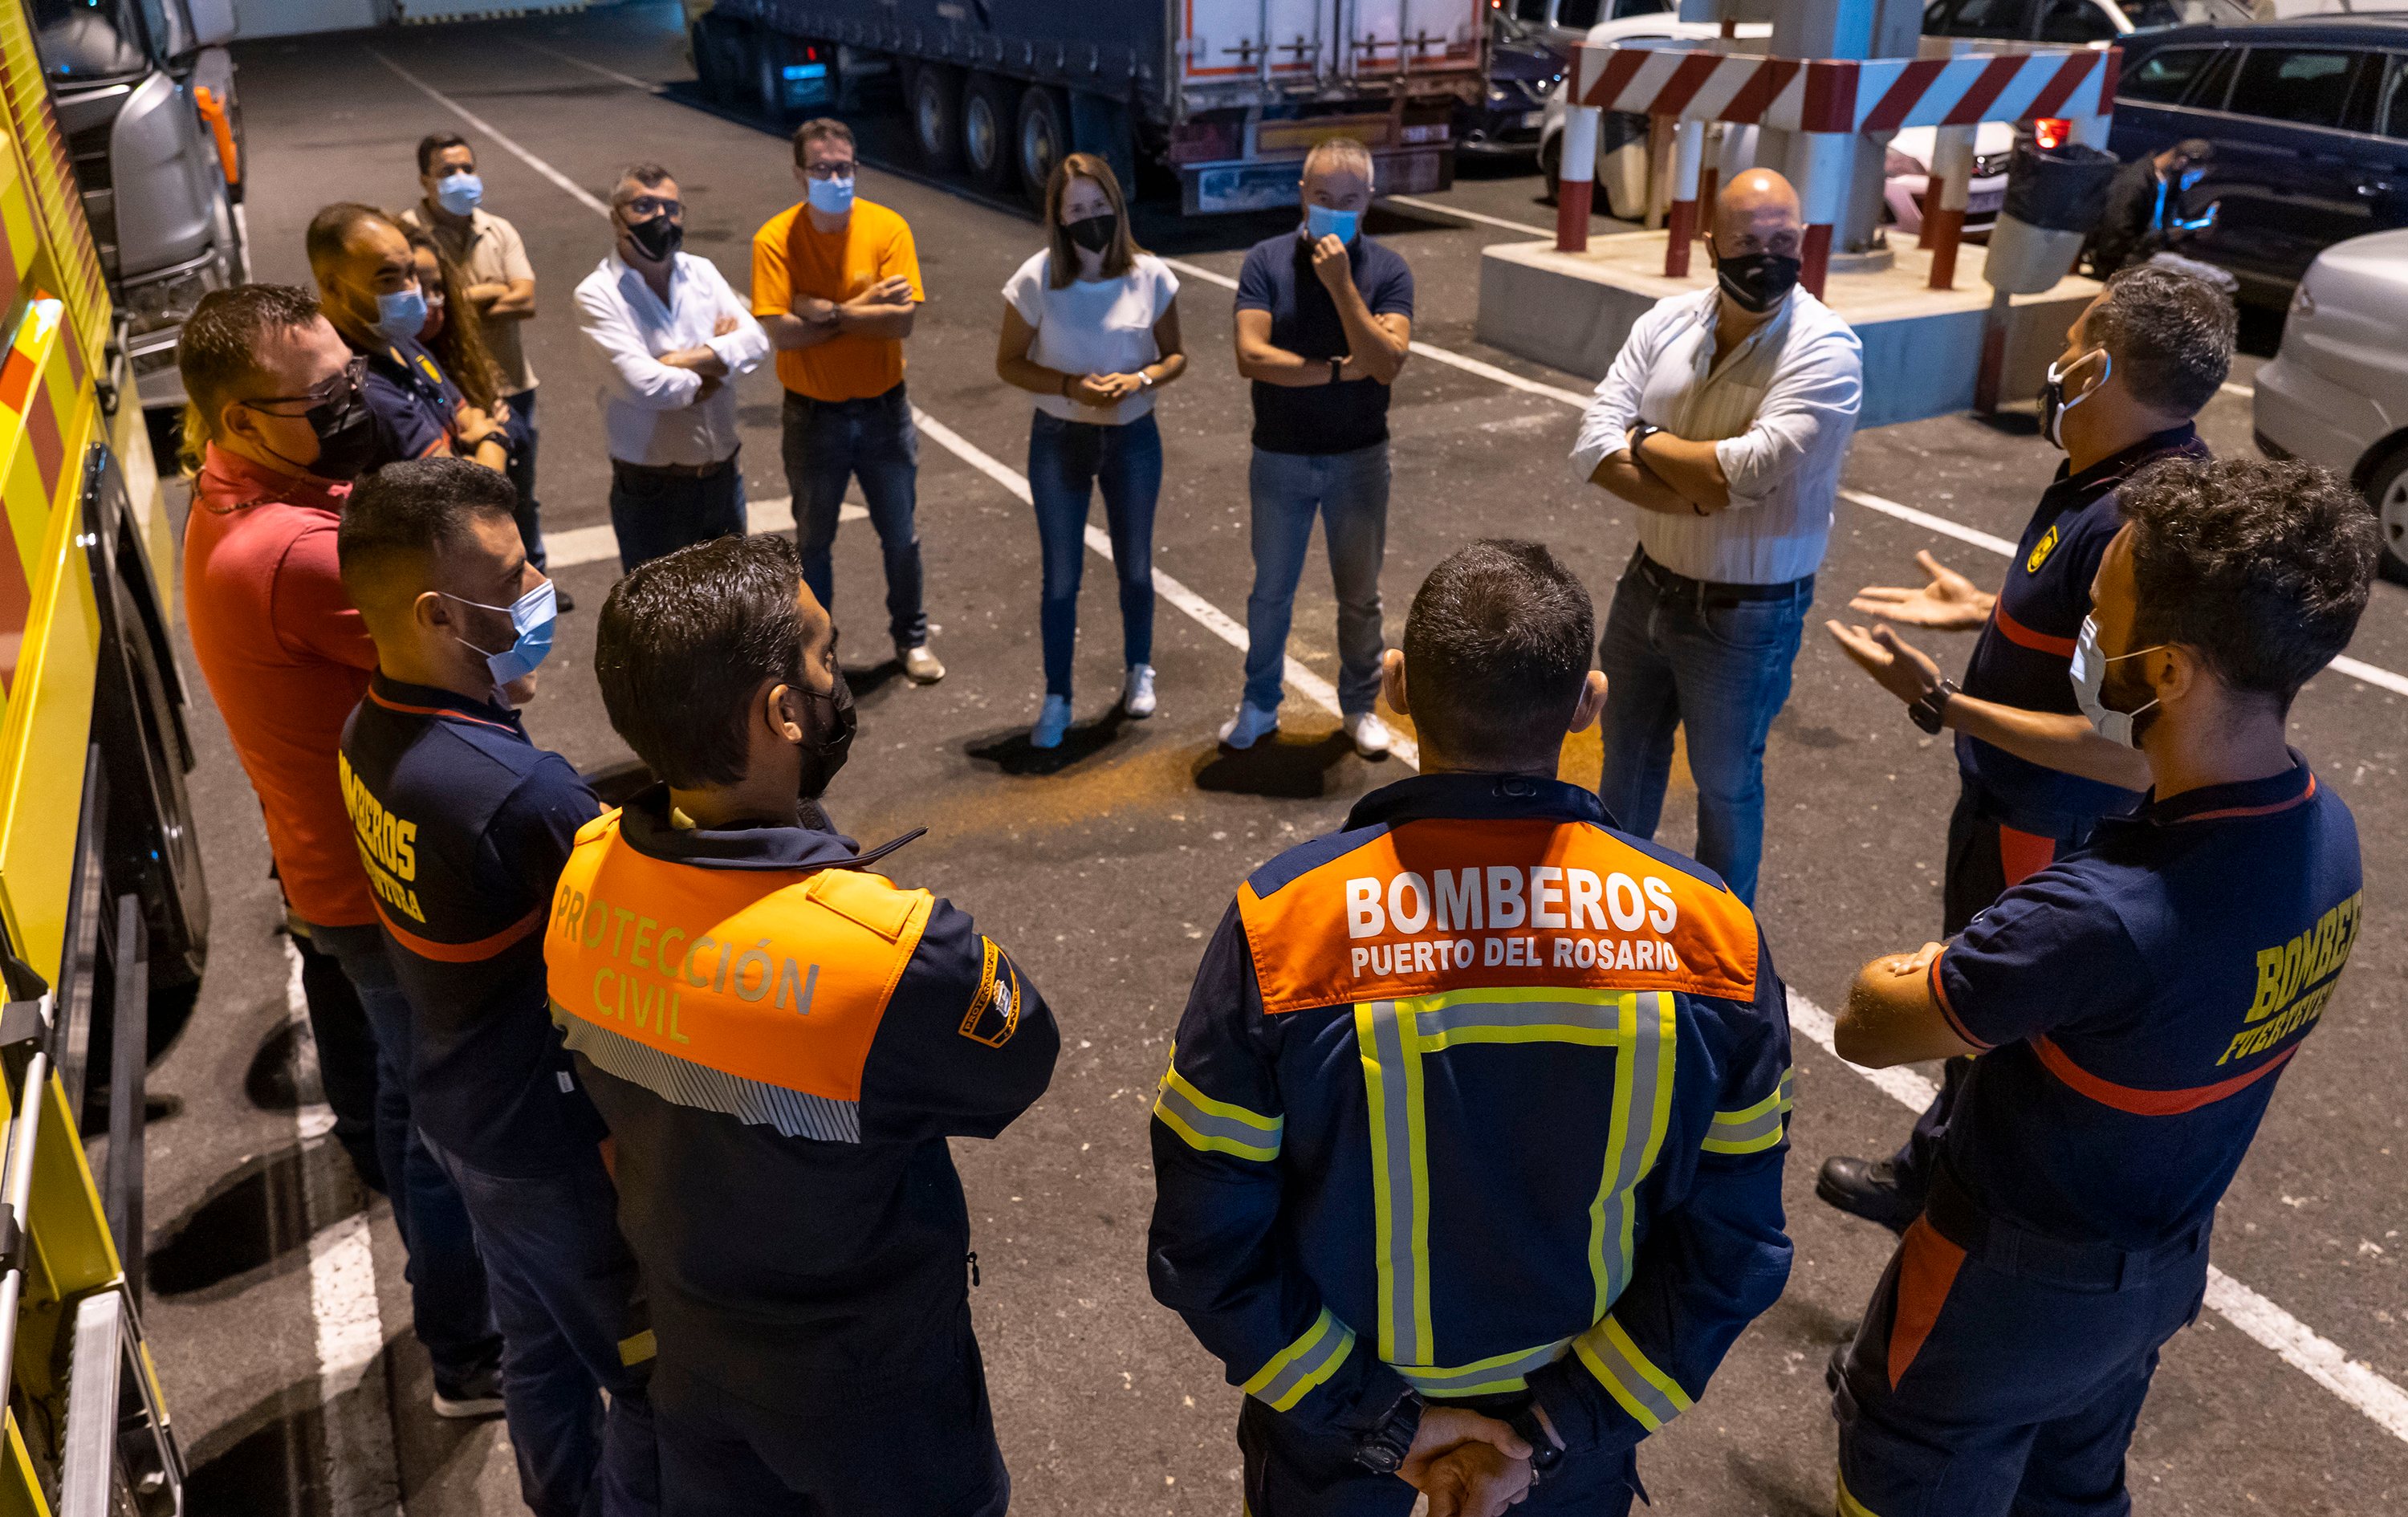 A Fire Brigade Leaves For La Palma To Help In Emergency Work